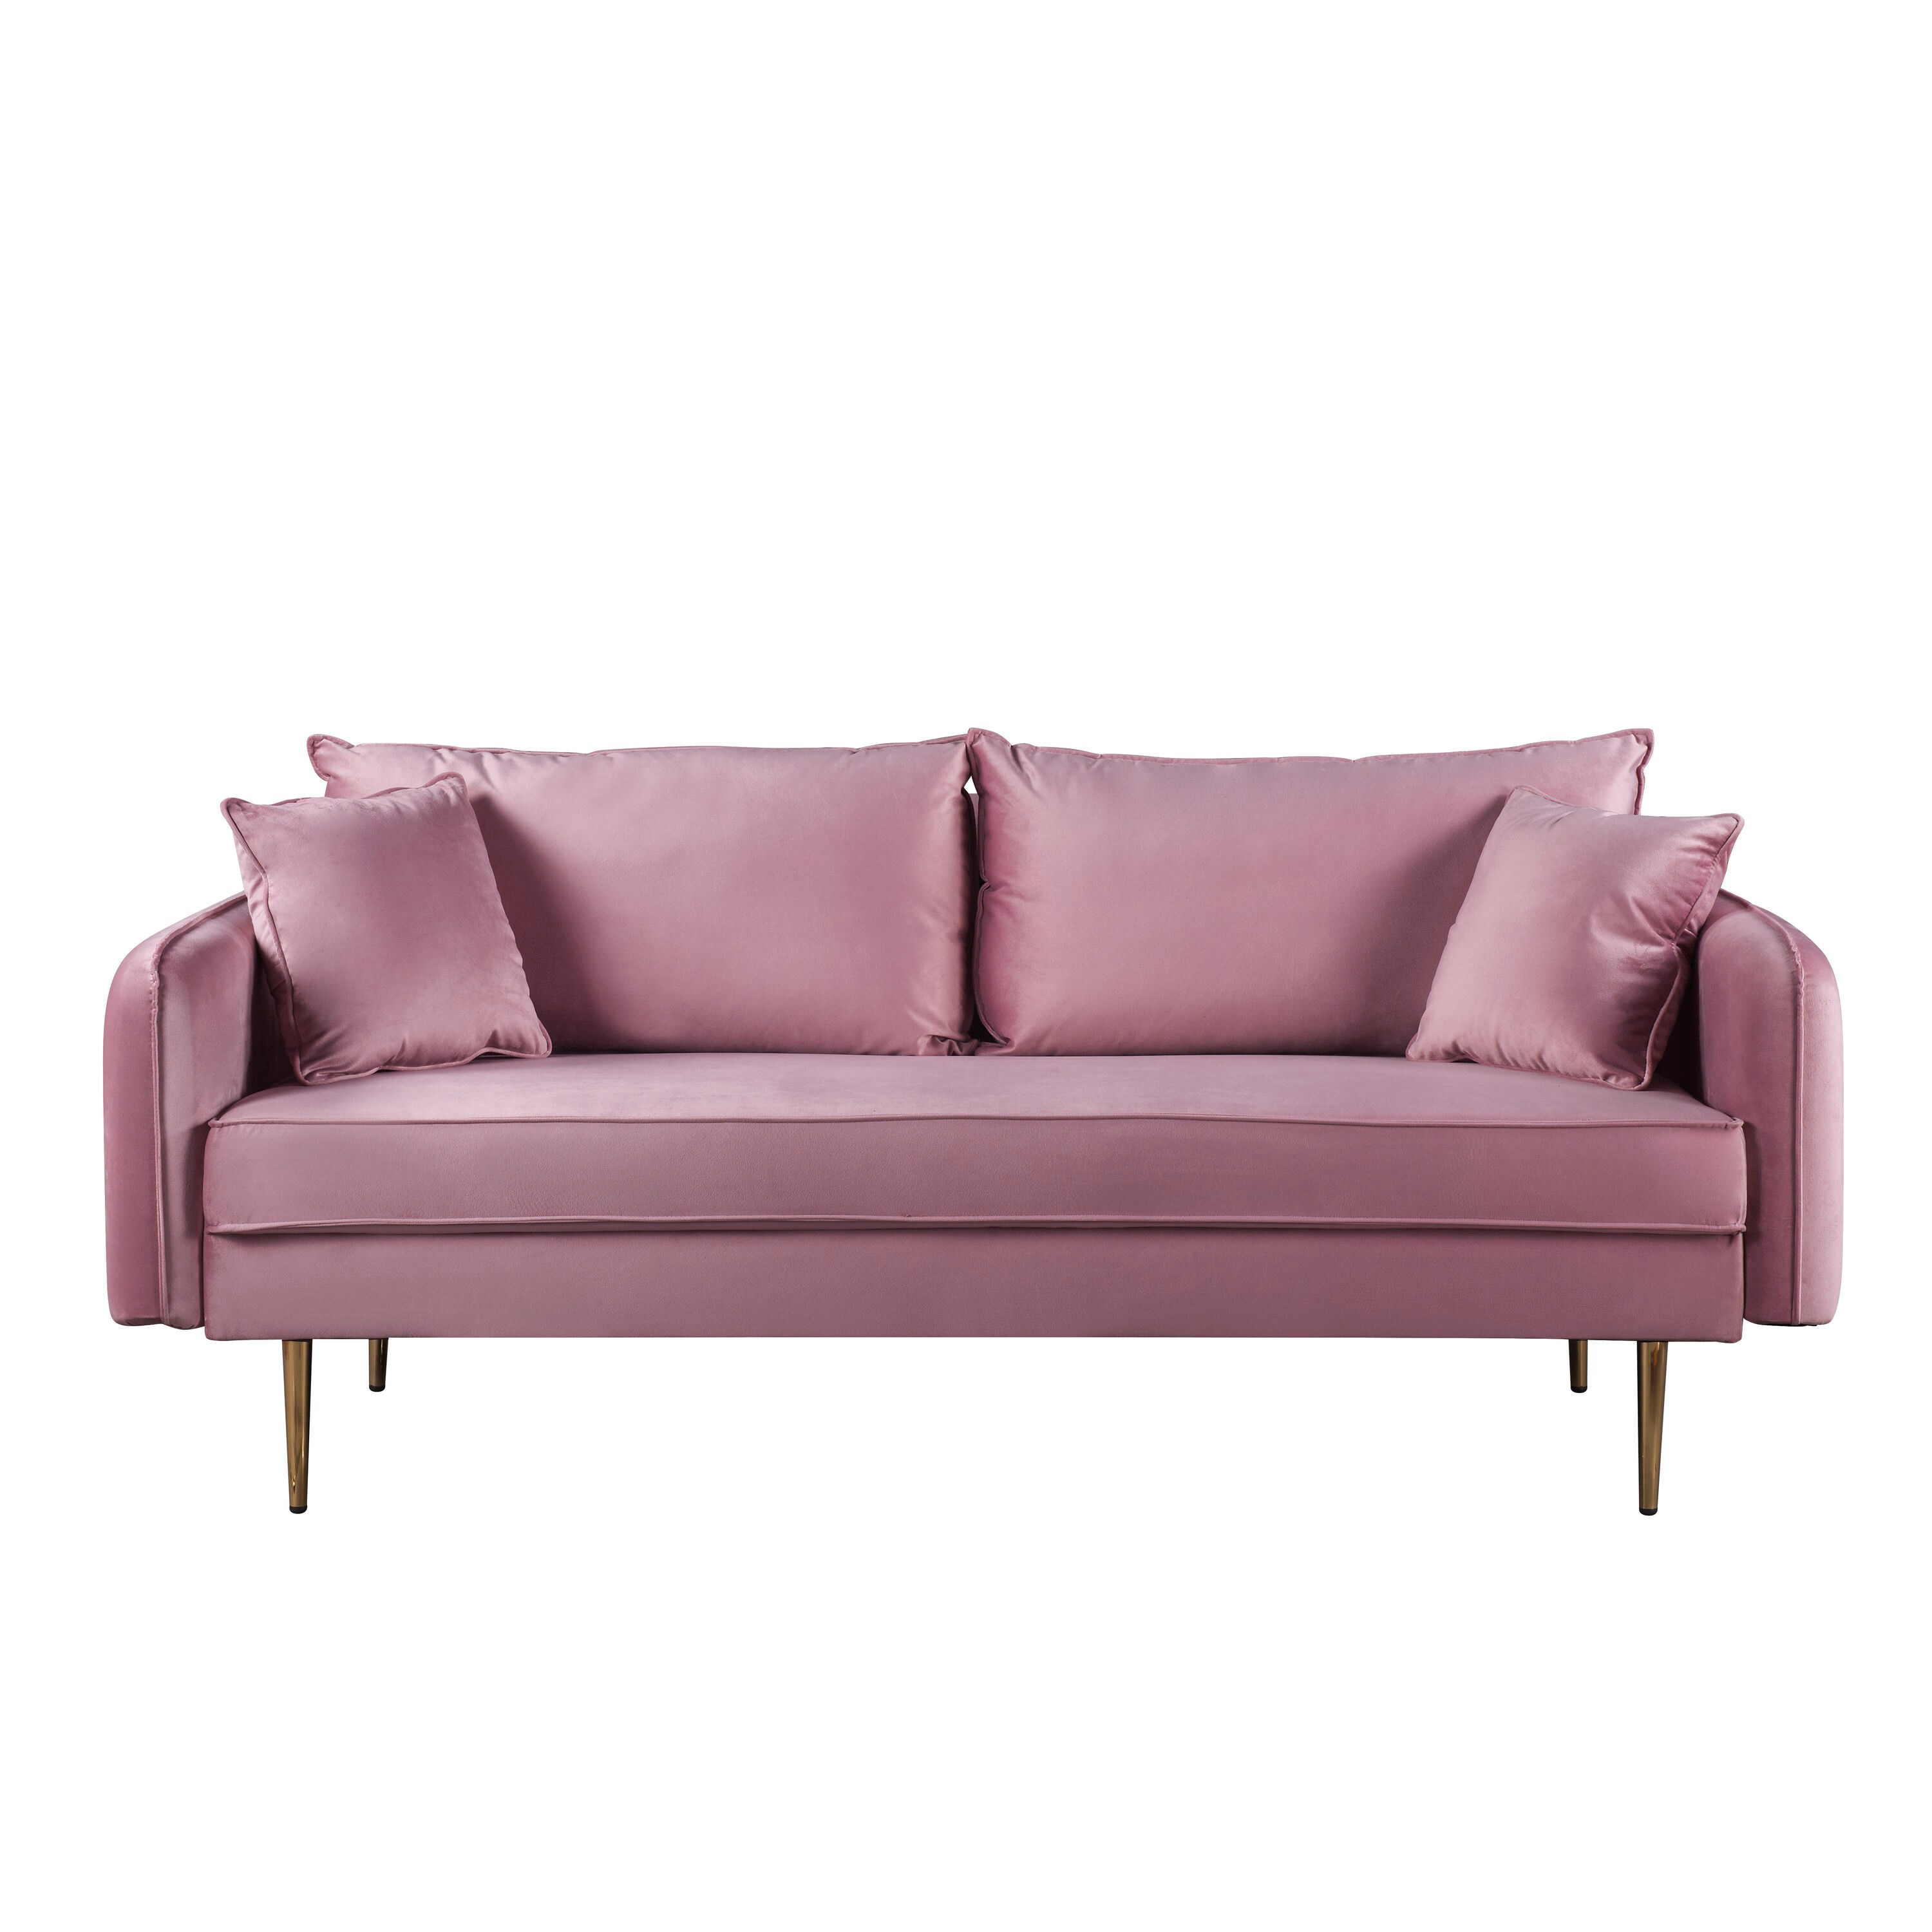 GZMR Modern Pink Polyester/Blend Sofa | 668AAHUS-LC